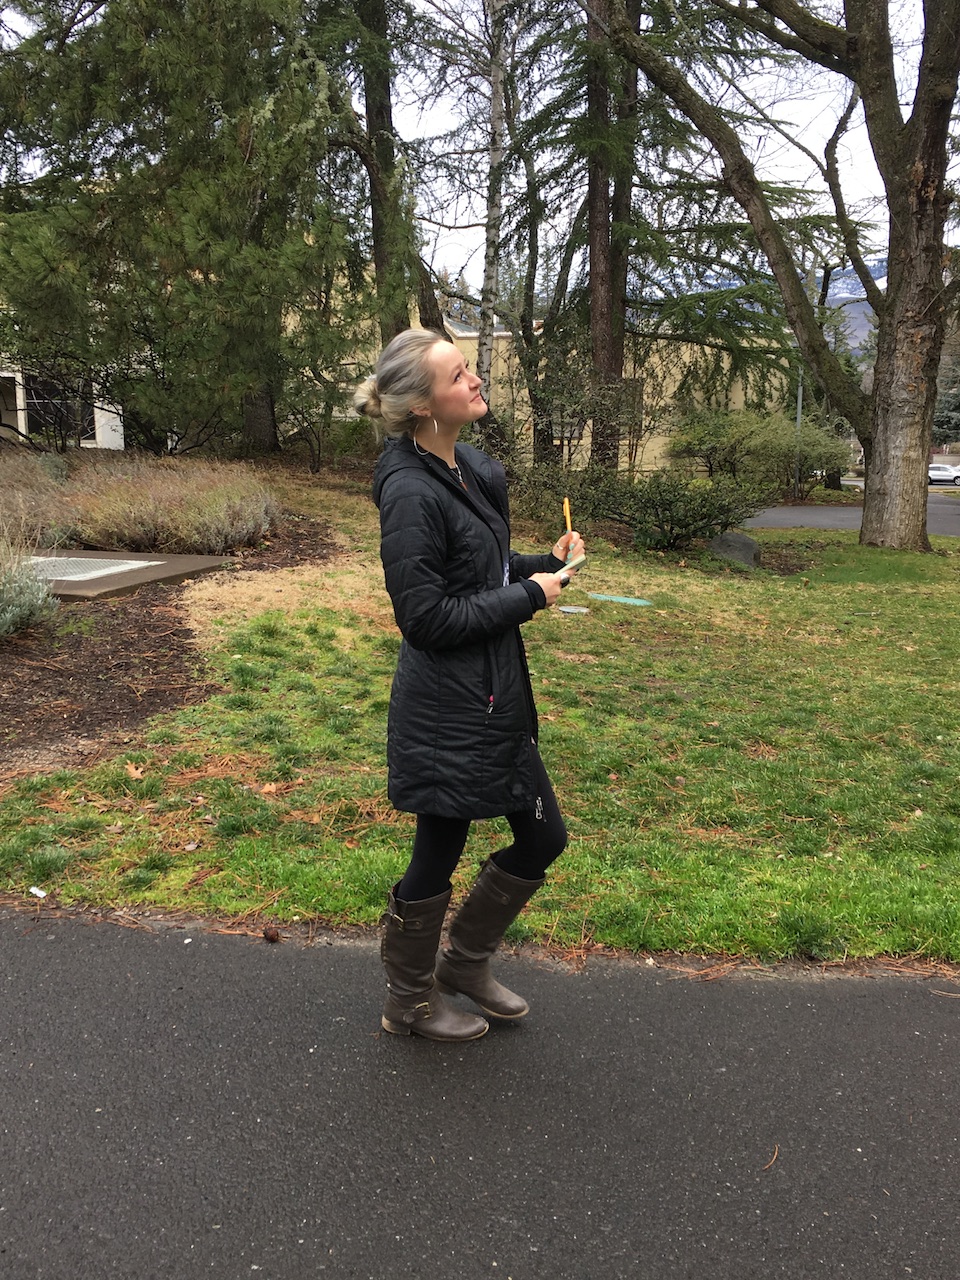 Walk In Nature activity in COMM325 - Nonverbal Communication